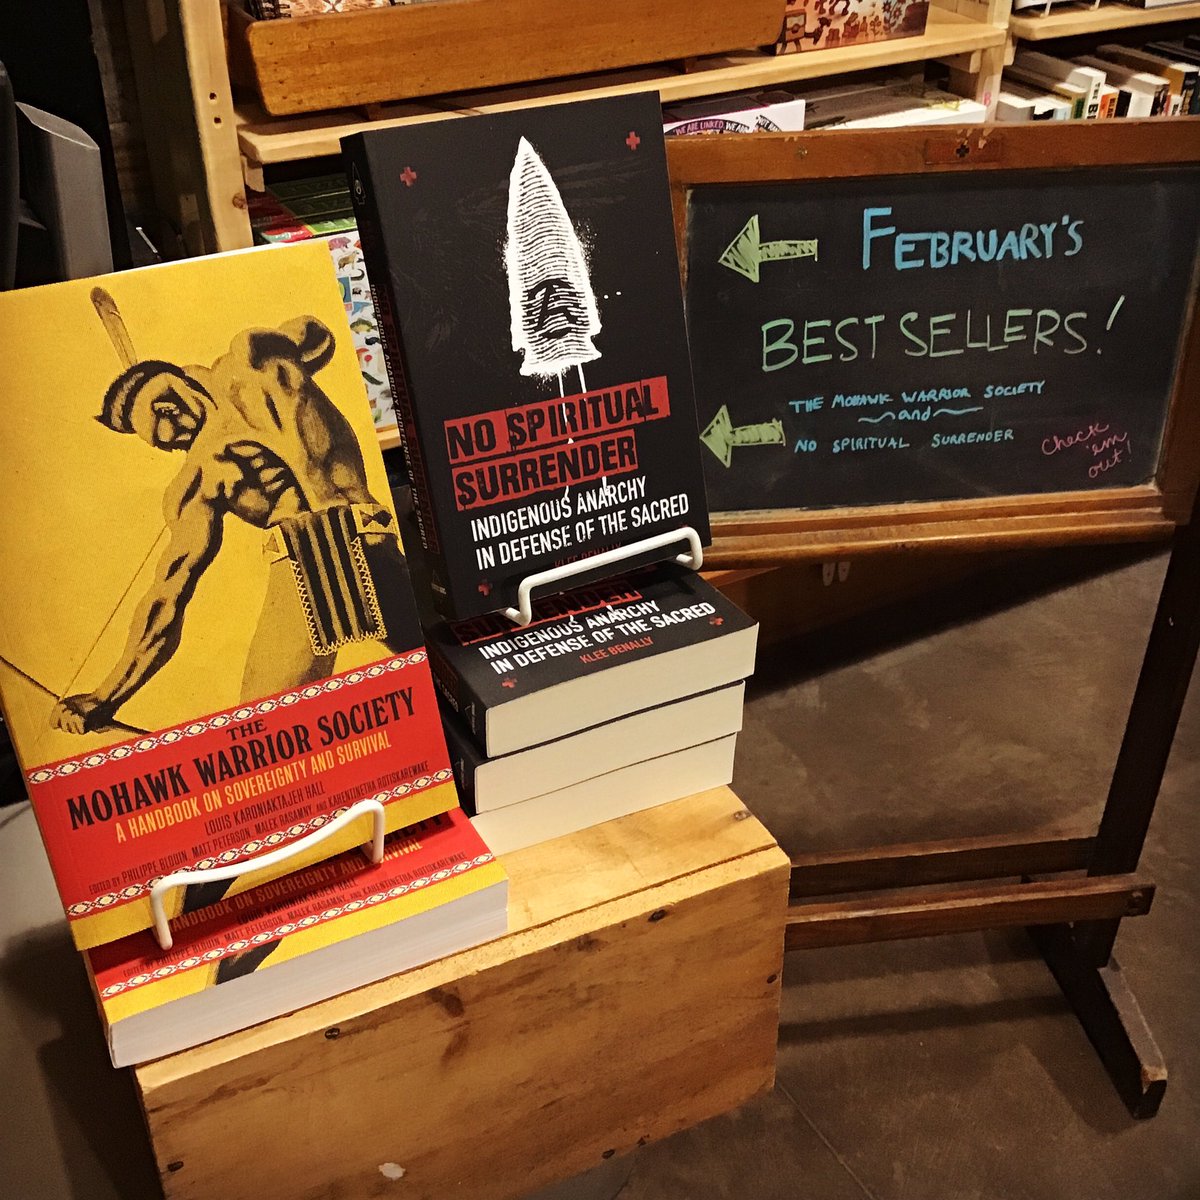 Last month’s best sellers: No Spiritual Surrender, “A searing anti-colonial analysis rooted in frontline experience” burningbooks.com/products/no-sp… The Mohawk Warrior Society, “Their own story with their own voices, an example and inspiration” burningbooks.com/products/mohaw…